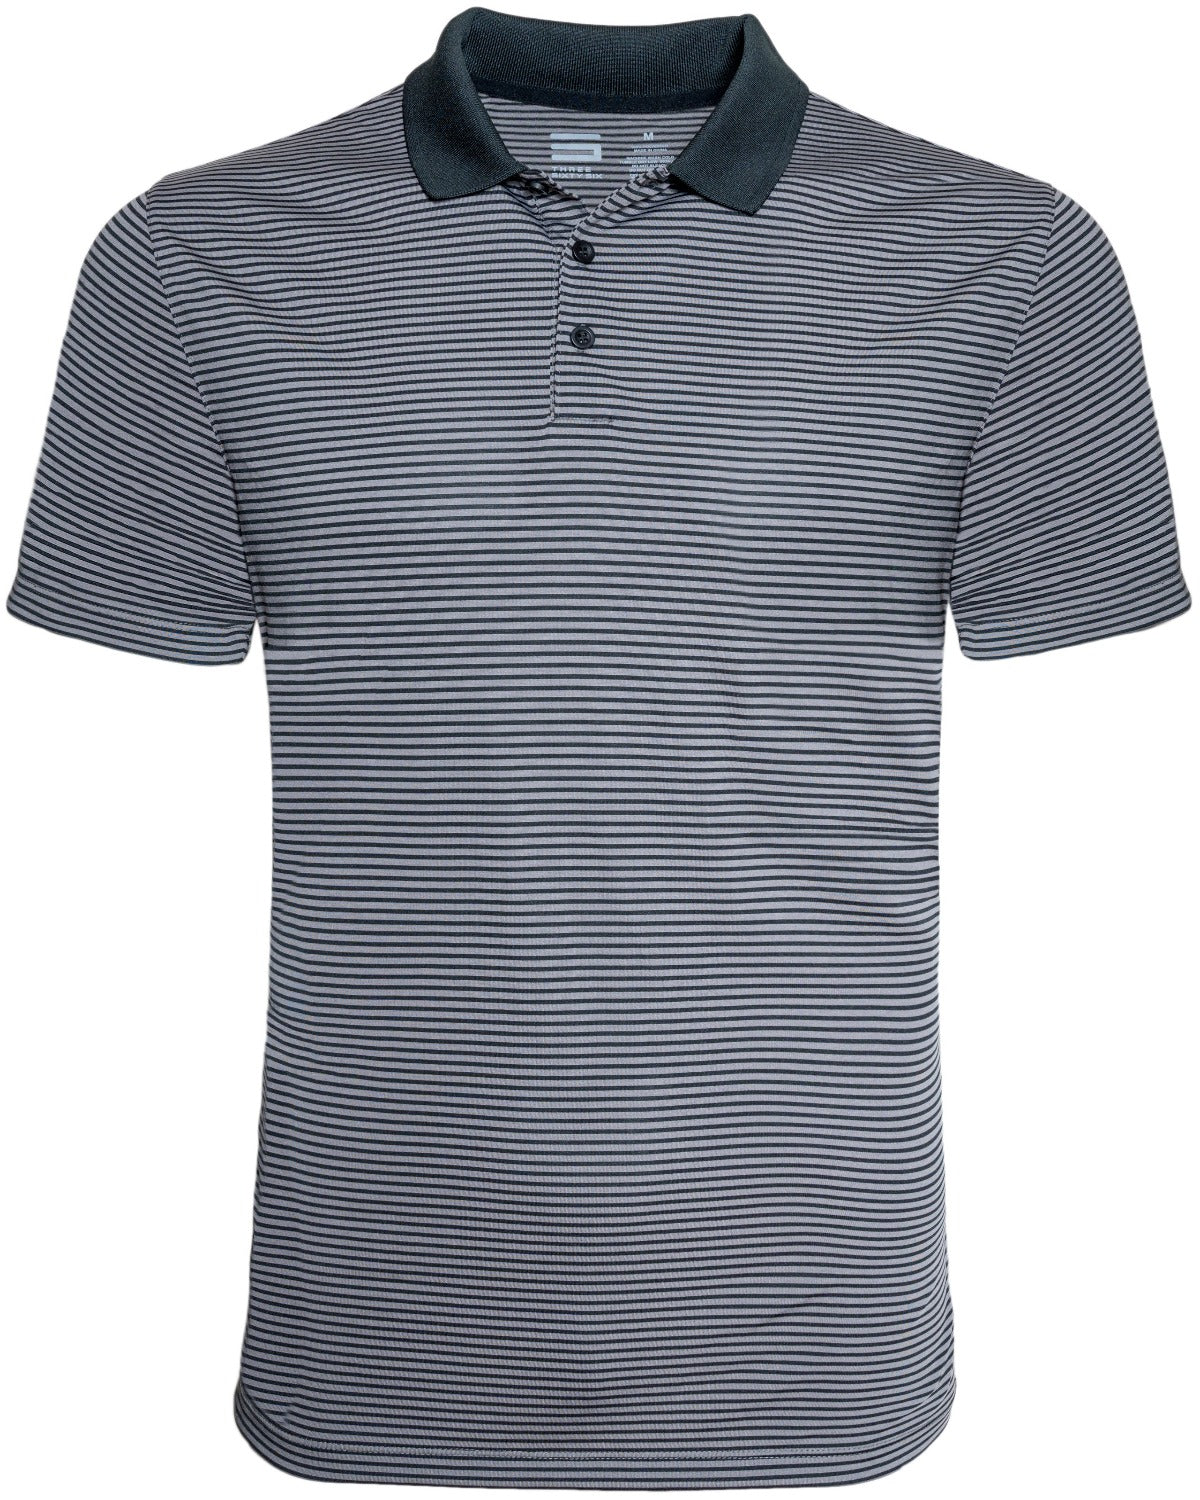 Men's Thin-Striped Dry-Fit Golf Polo